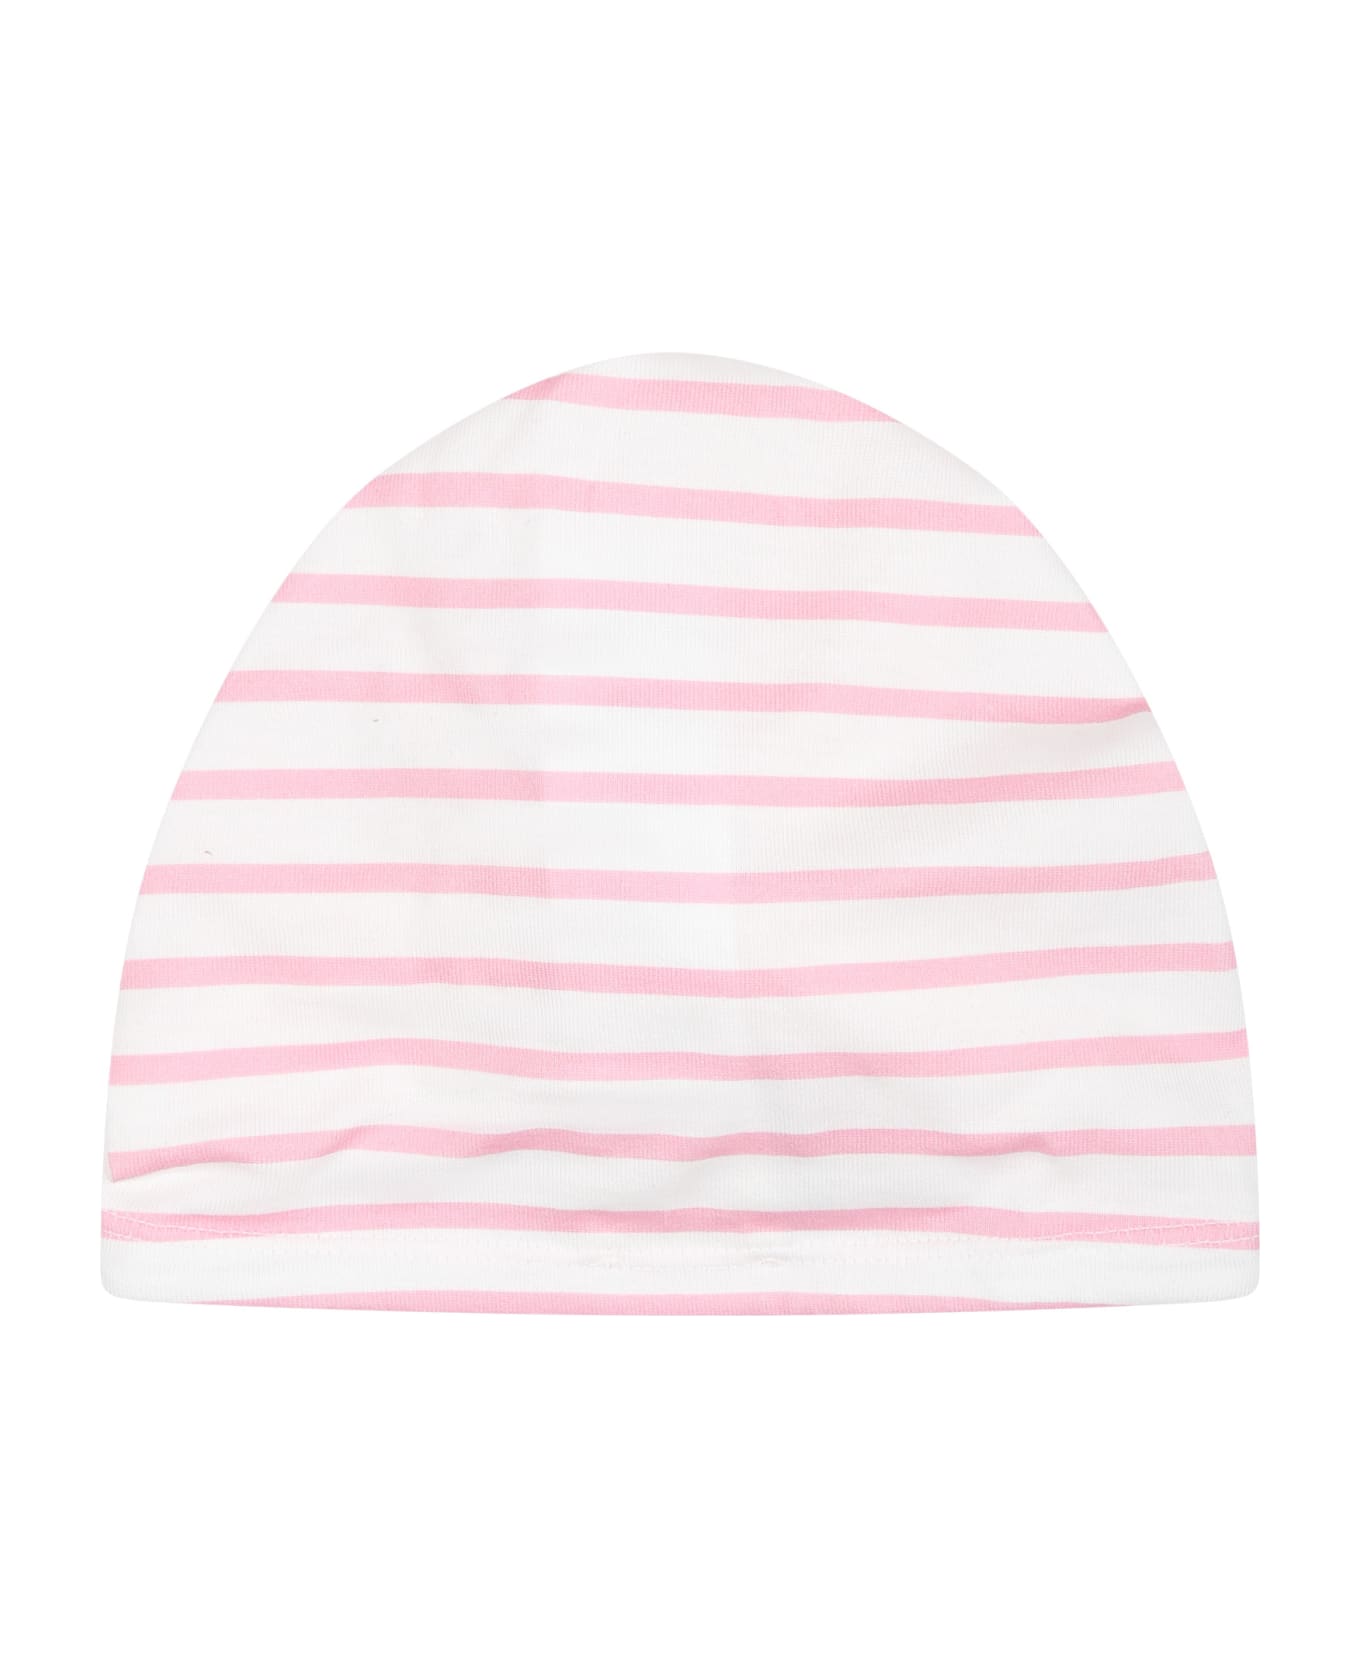 Givenchy Pink Dress For Baby Girl With Stripes - Pink ウェア